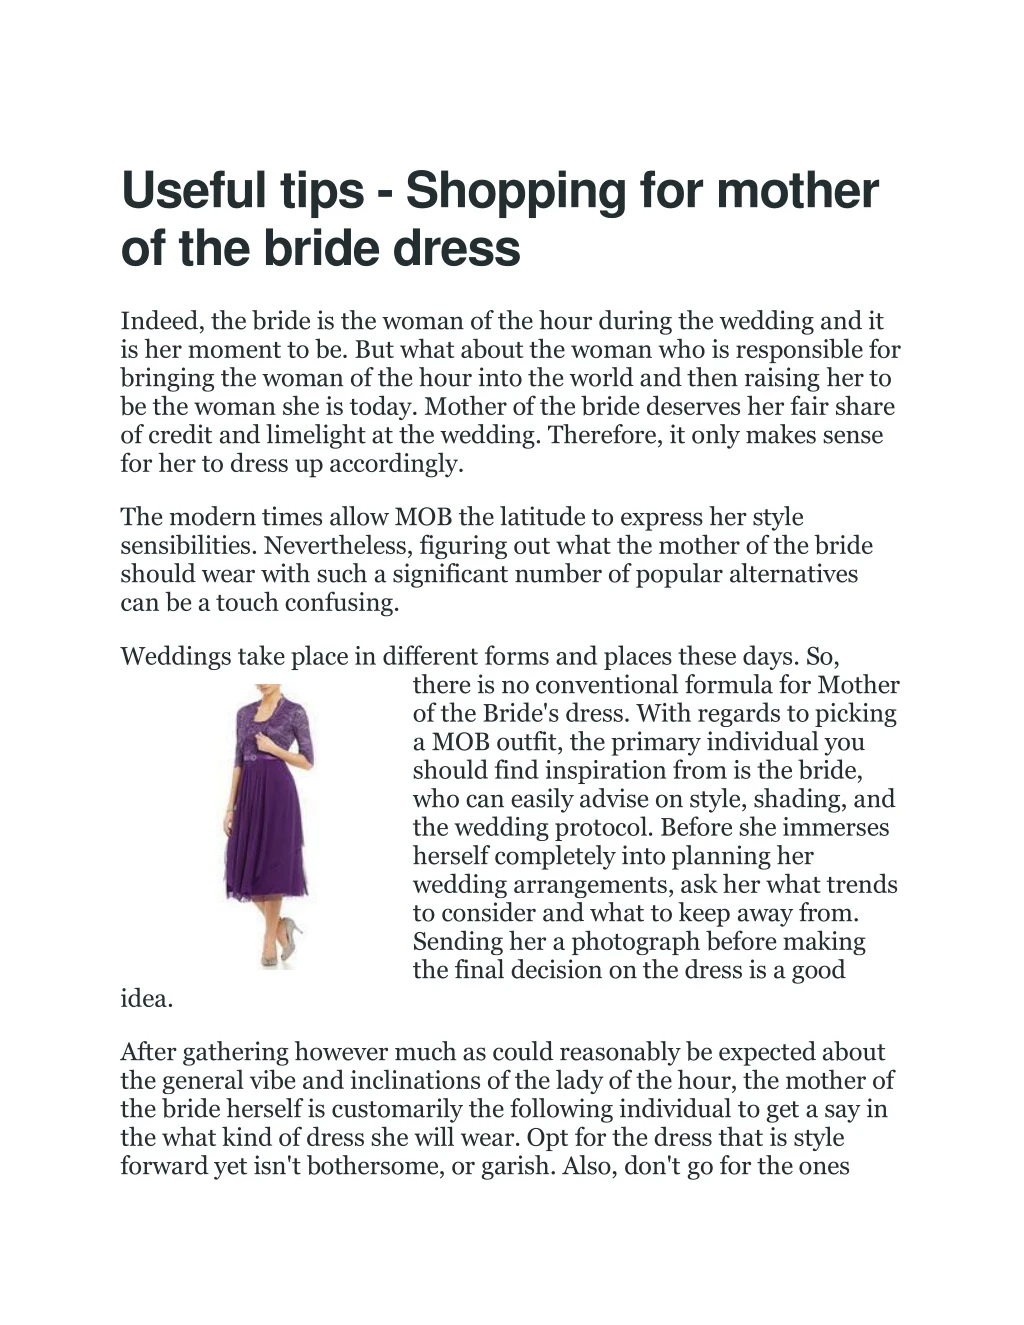 useful tips shopping for mother of the bride dress